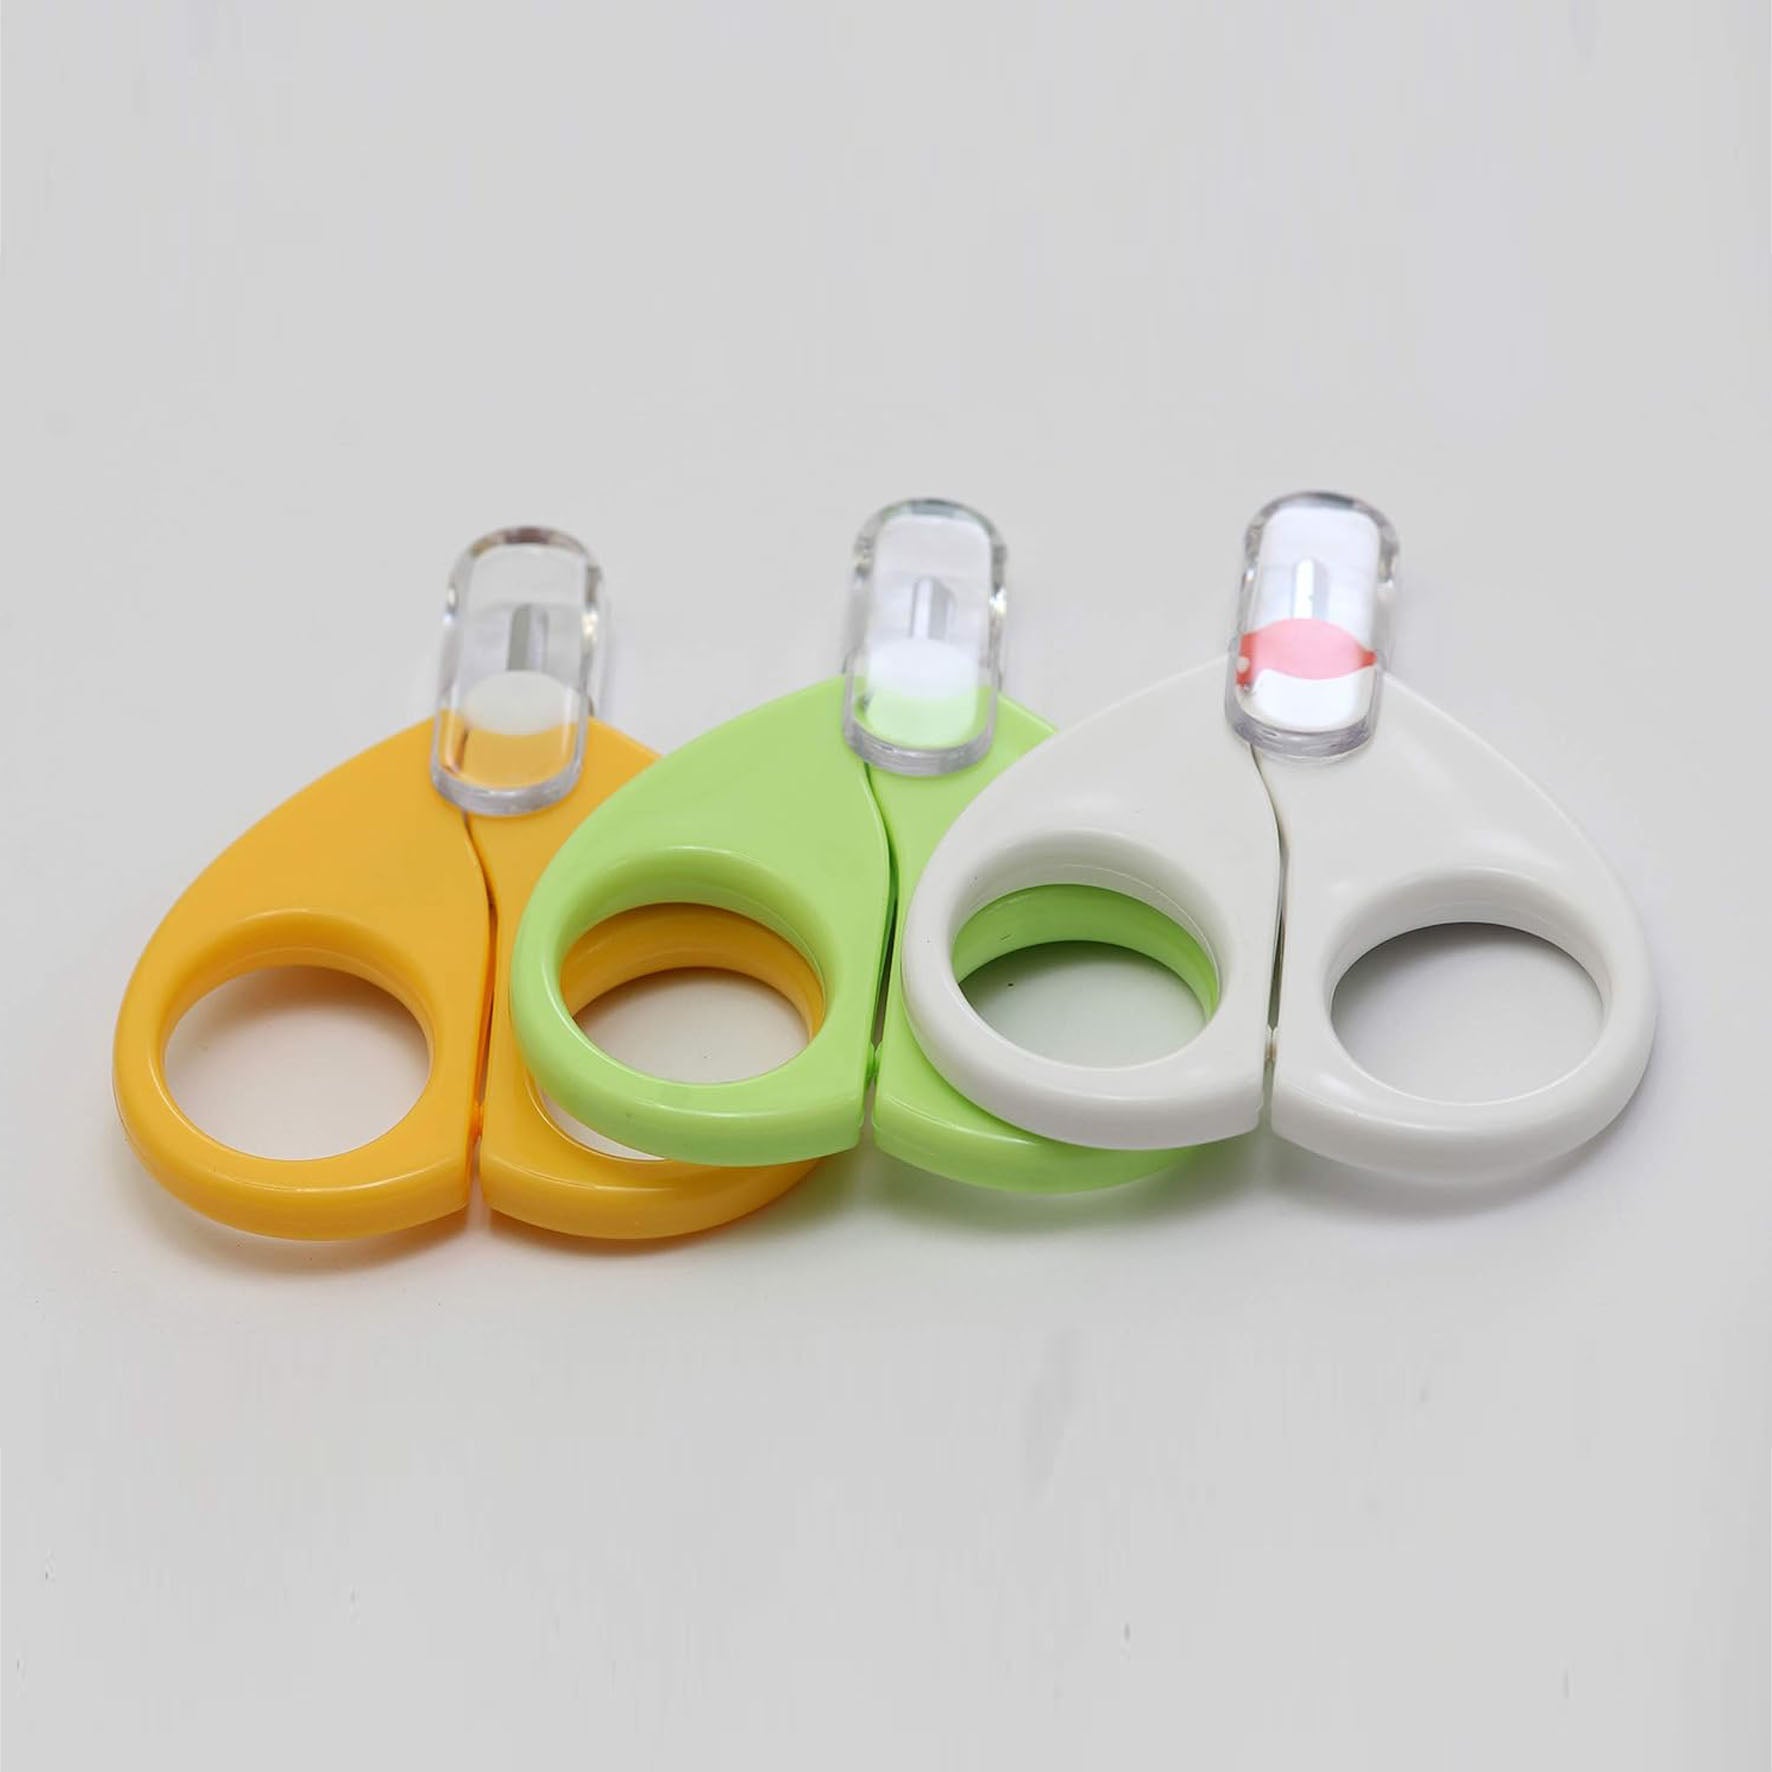 Rikang Baby Safety Scissors with Circular Cutter Head (Assorted Color)